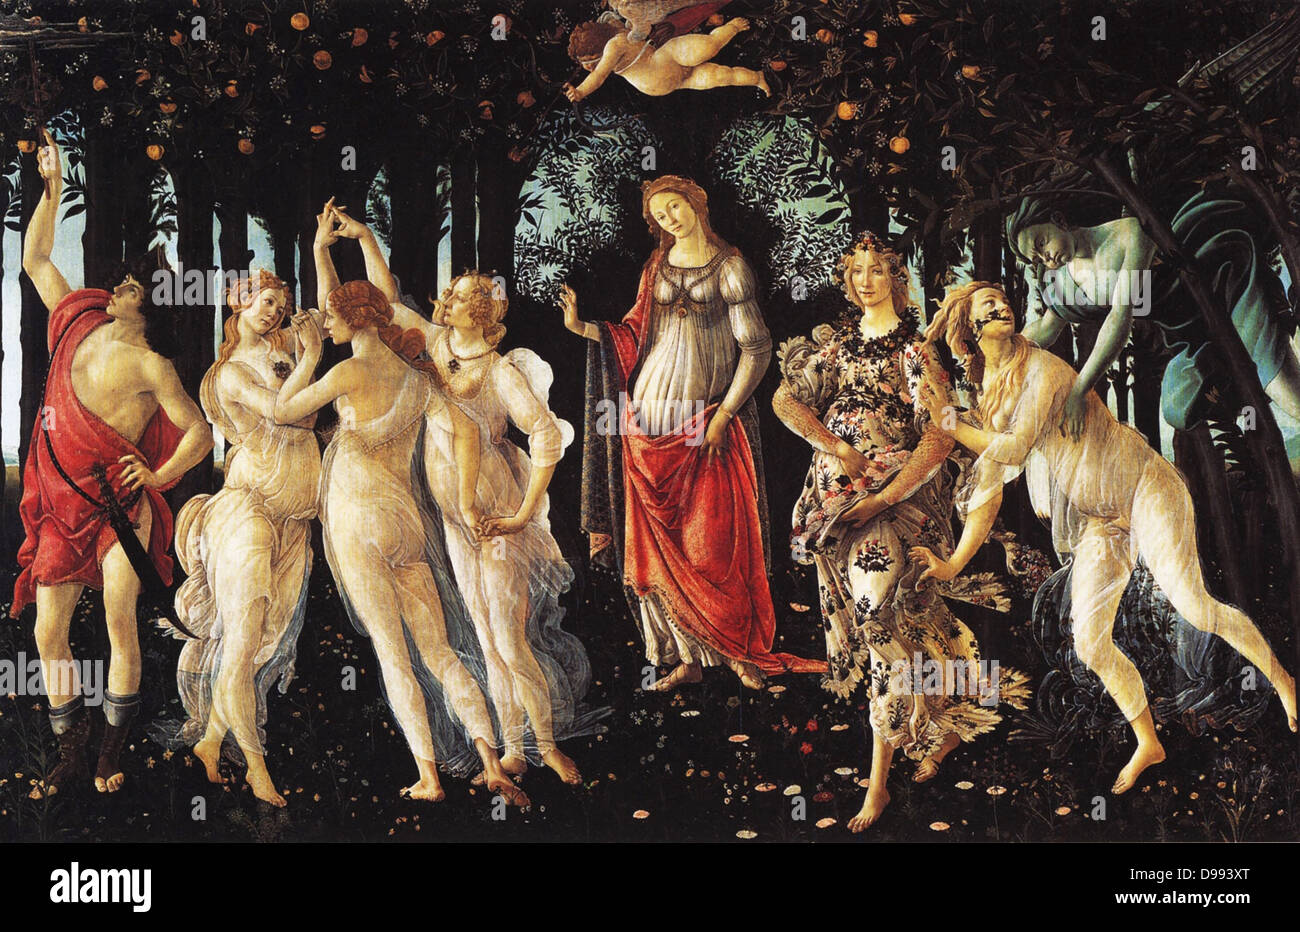 La Primavera', c. 1482; painting by the Italian Renaissance painter Sandro Botticelli c. 1445 - 1510. Venus is standing in the center of the picture. Above her, Cupid is aiming one of his arrows of love at the Charites (Three Graces). The Grace on the rig Stock Photo